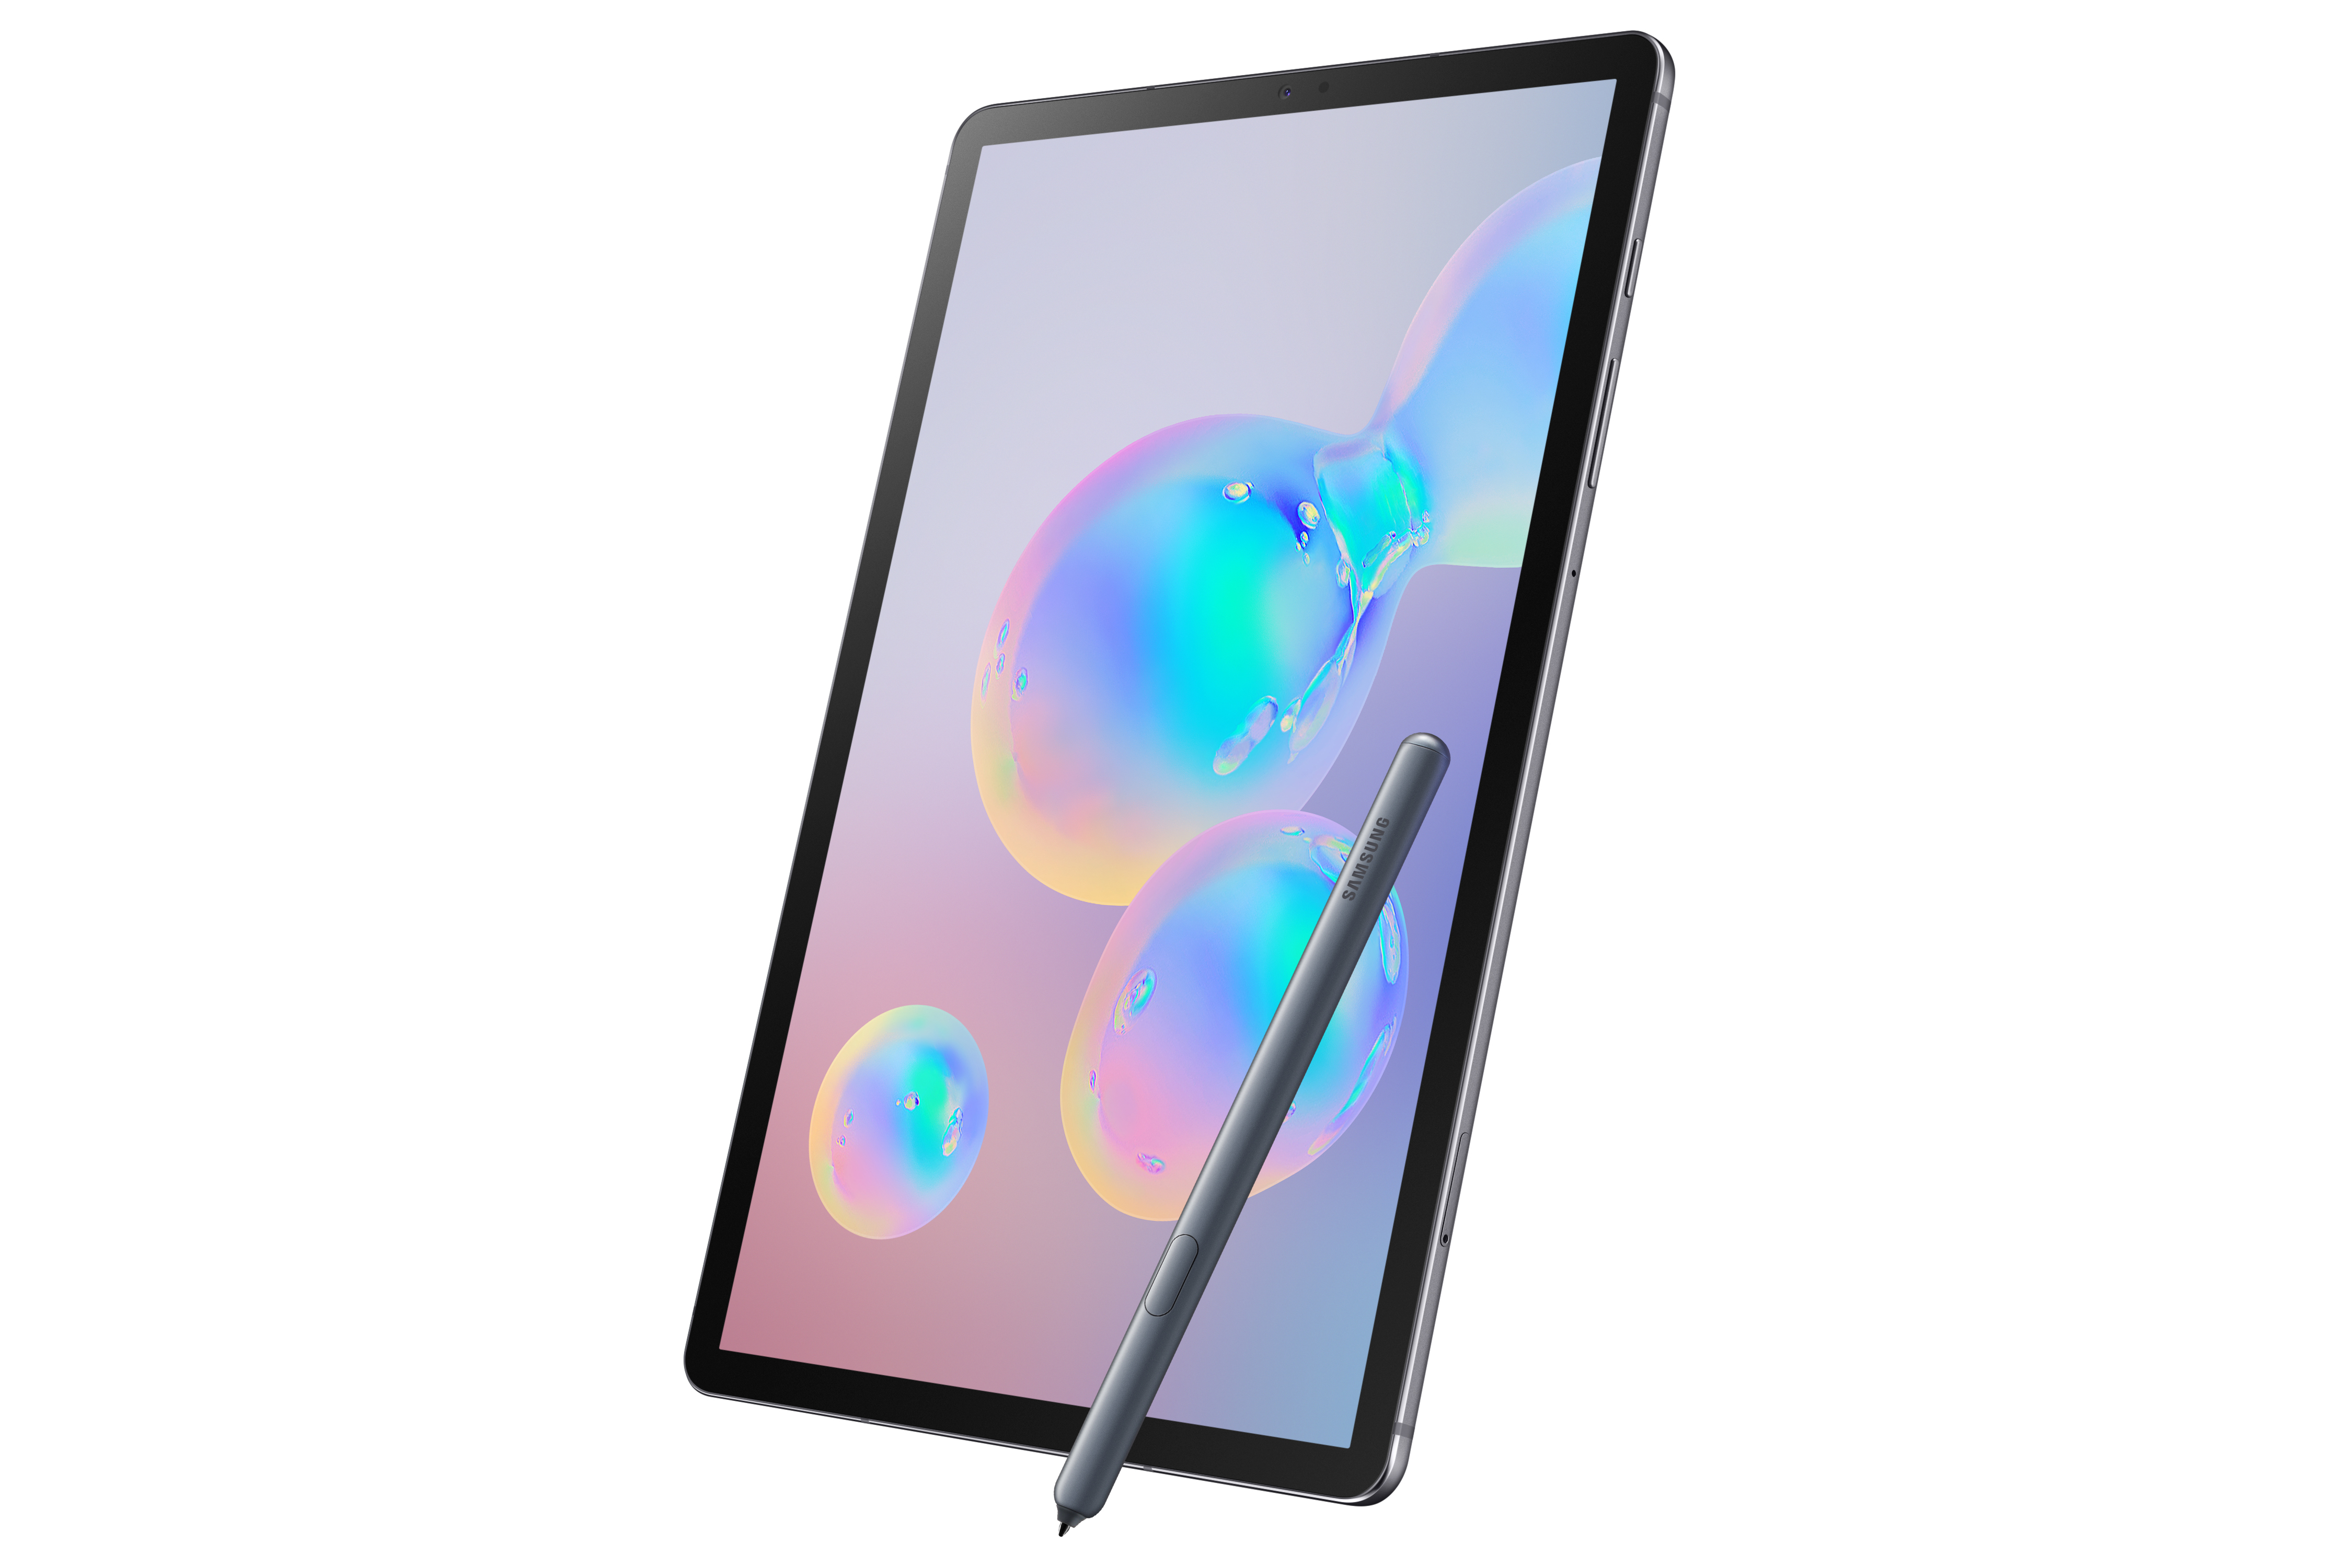 Galaxy Tab S6 Samsung's new tablet flagship for the first time with a